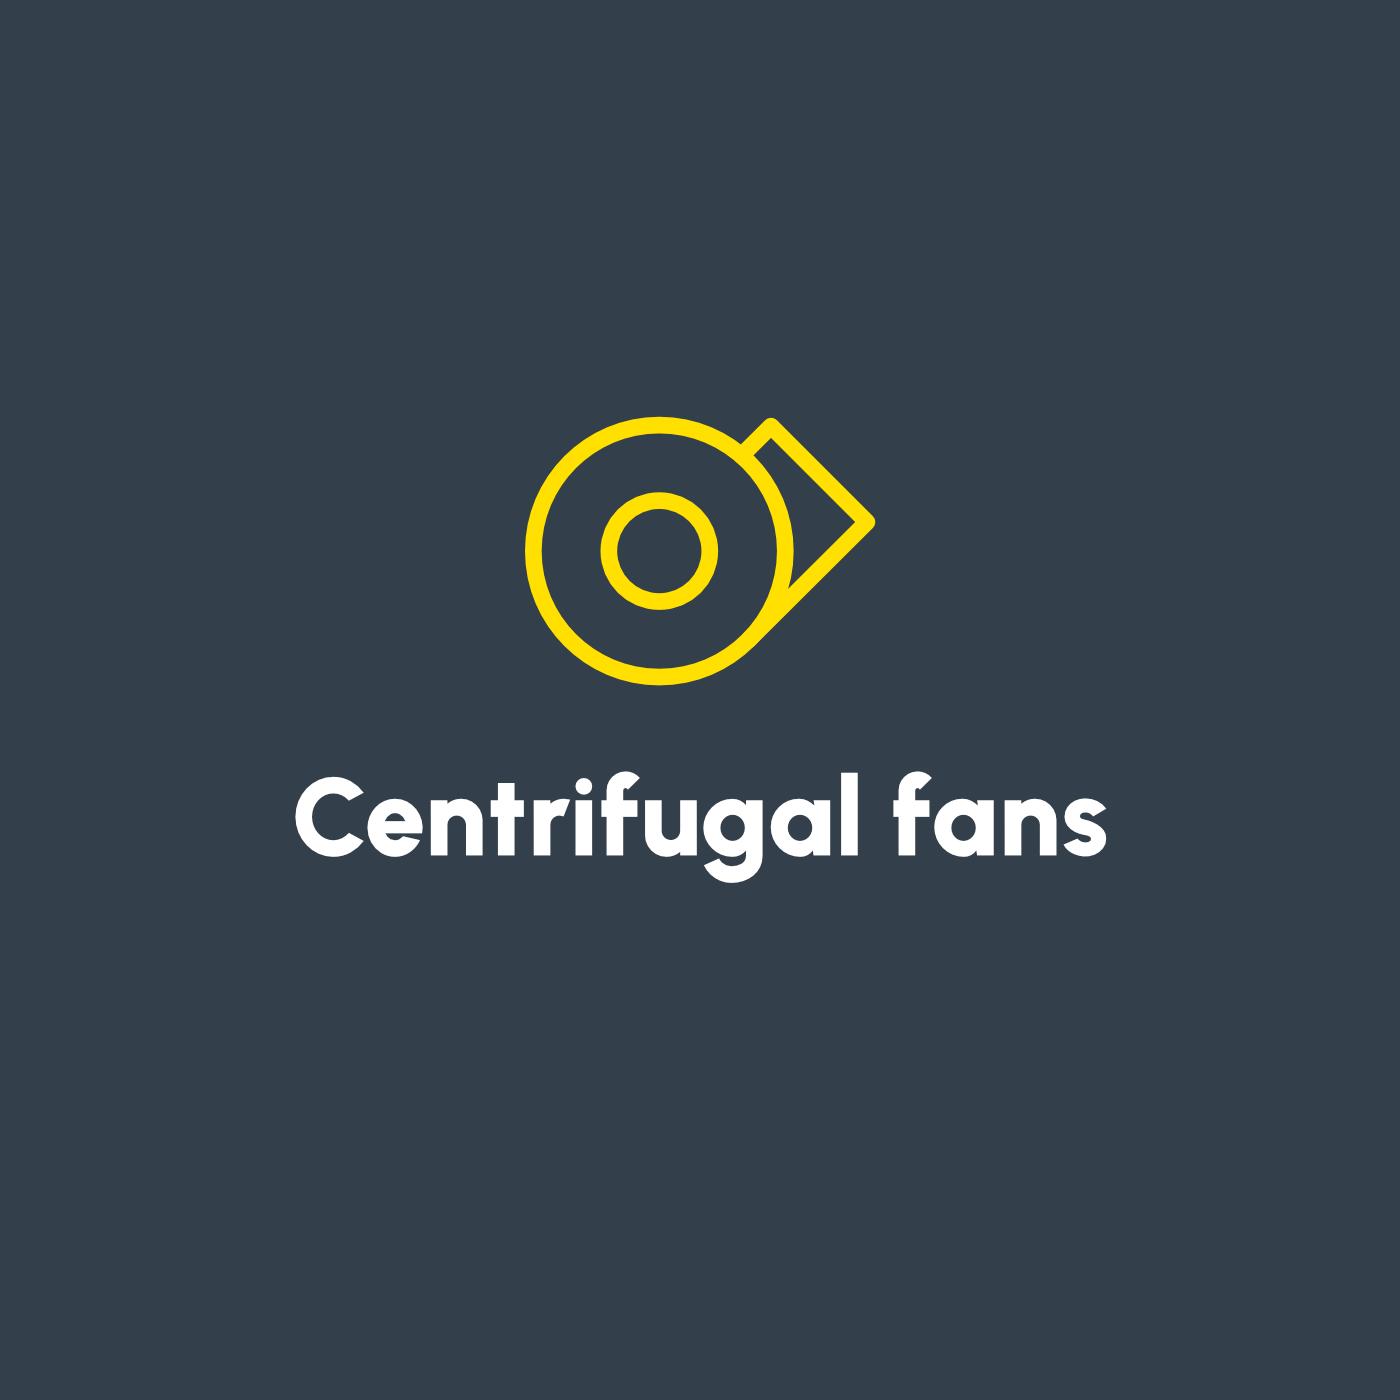 Image for Centrifugal fans